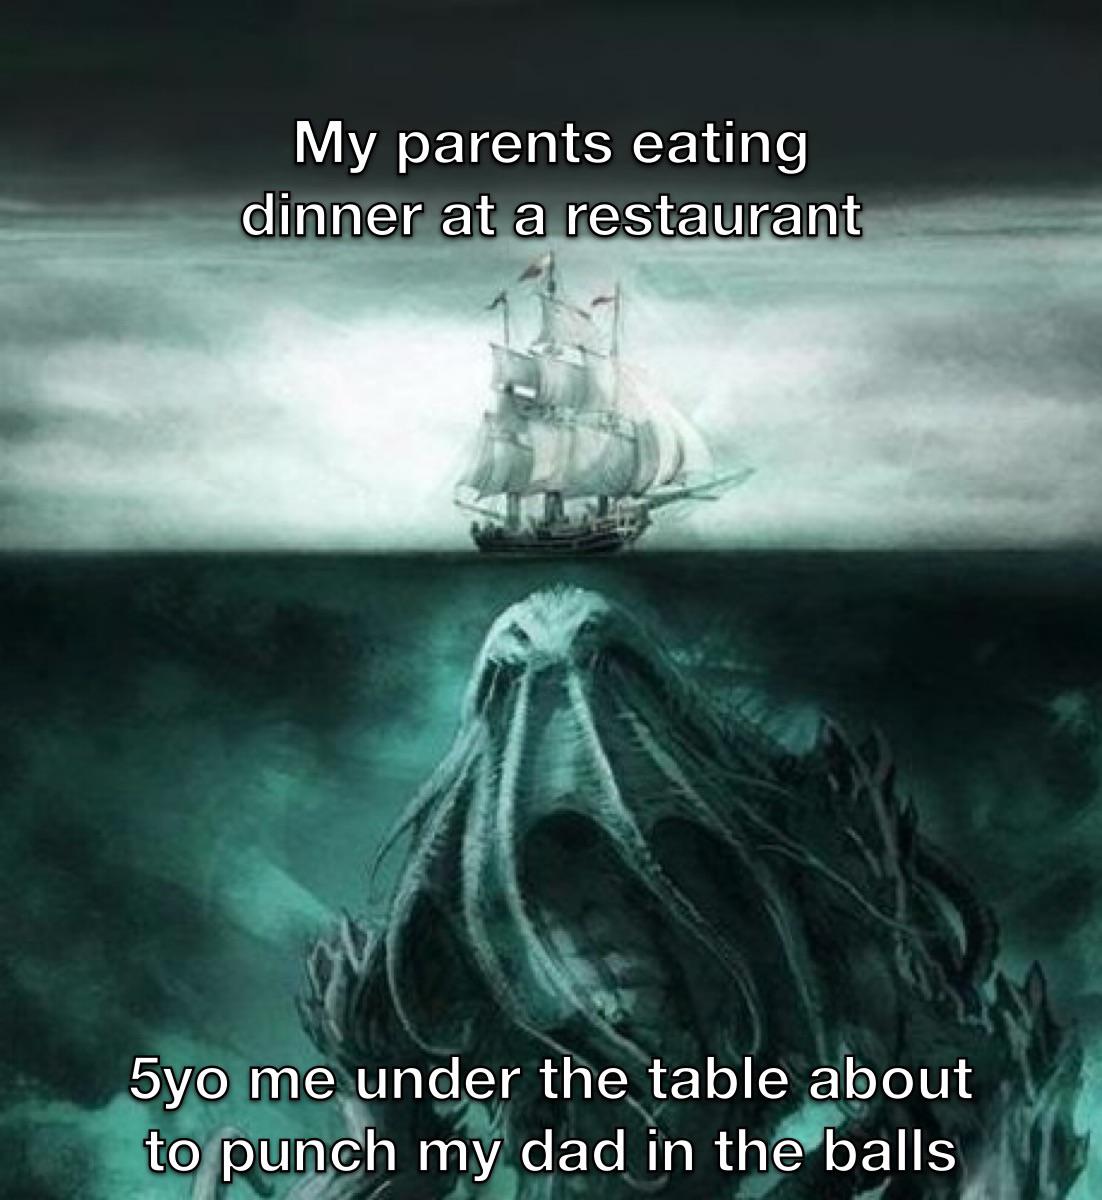 cthulhu lovecraft - My parents eating dinner at a restaurant 5yo me under the table about to punch my dad in the balls